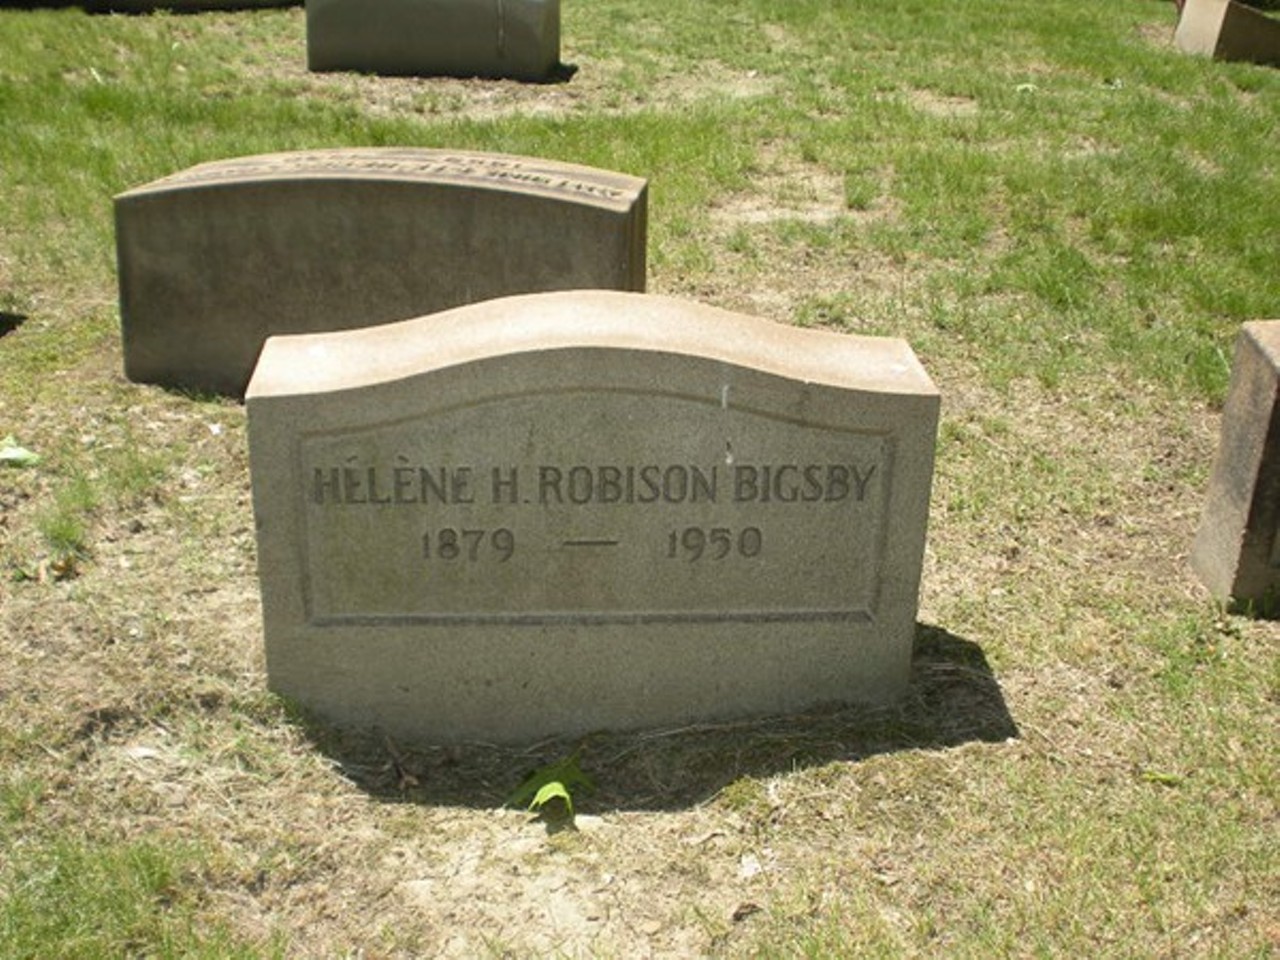 Helene Hathaway Robison Britton (1879-1950) - Lakeview Cemetery
Deemed as "Baseball's First Lady," her father owned the Cleveland Spiders. Adding to her cred, she also inherited the St. Louis Cardinals in 1911 after the death of her uncles. Helene divorced Cardinals president Schuler Britton in 1916 and remarried (hence the Bigsby on the gravestone).